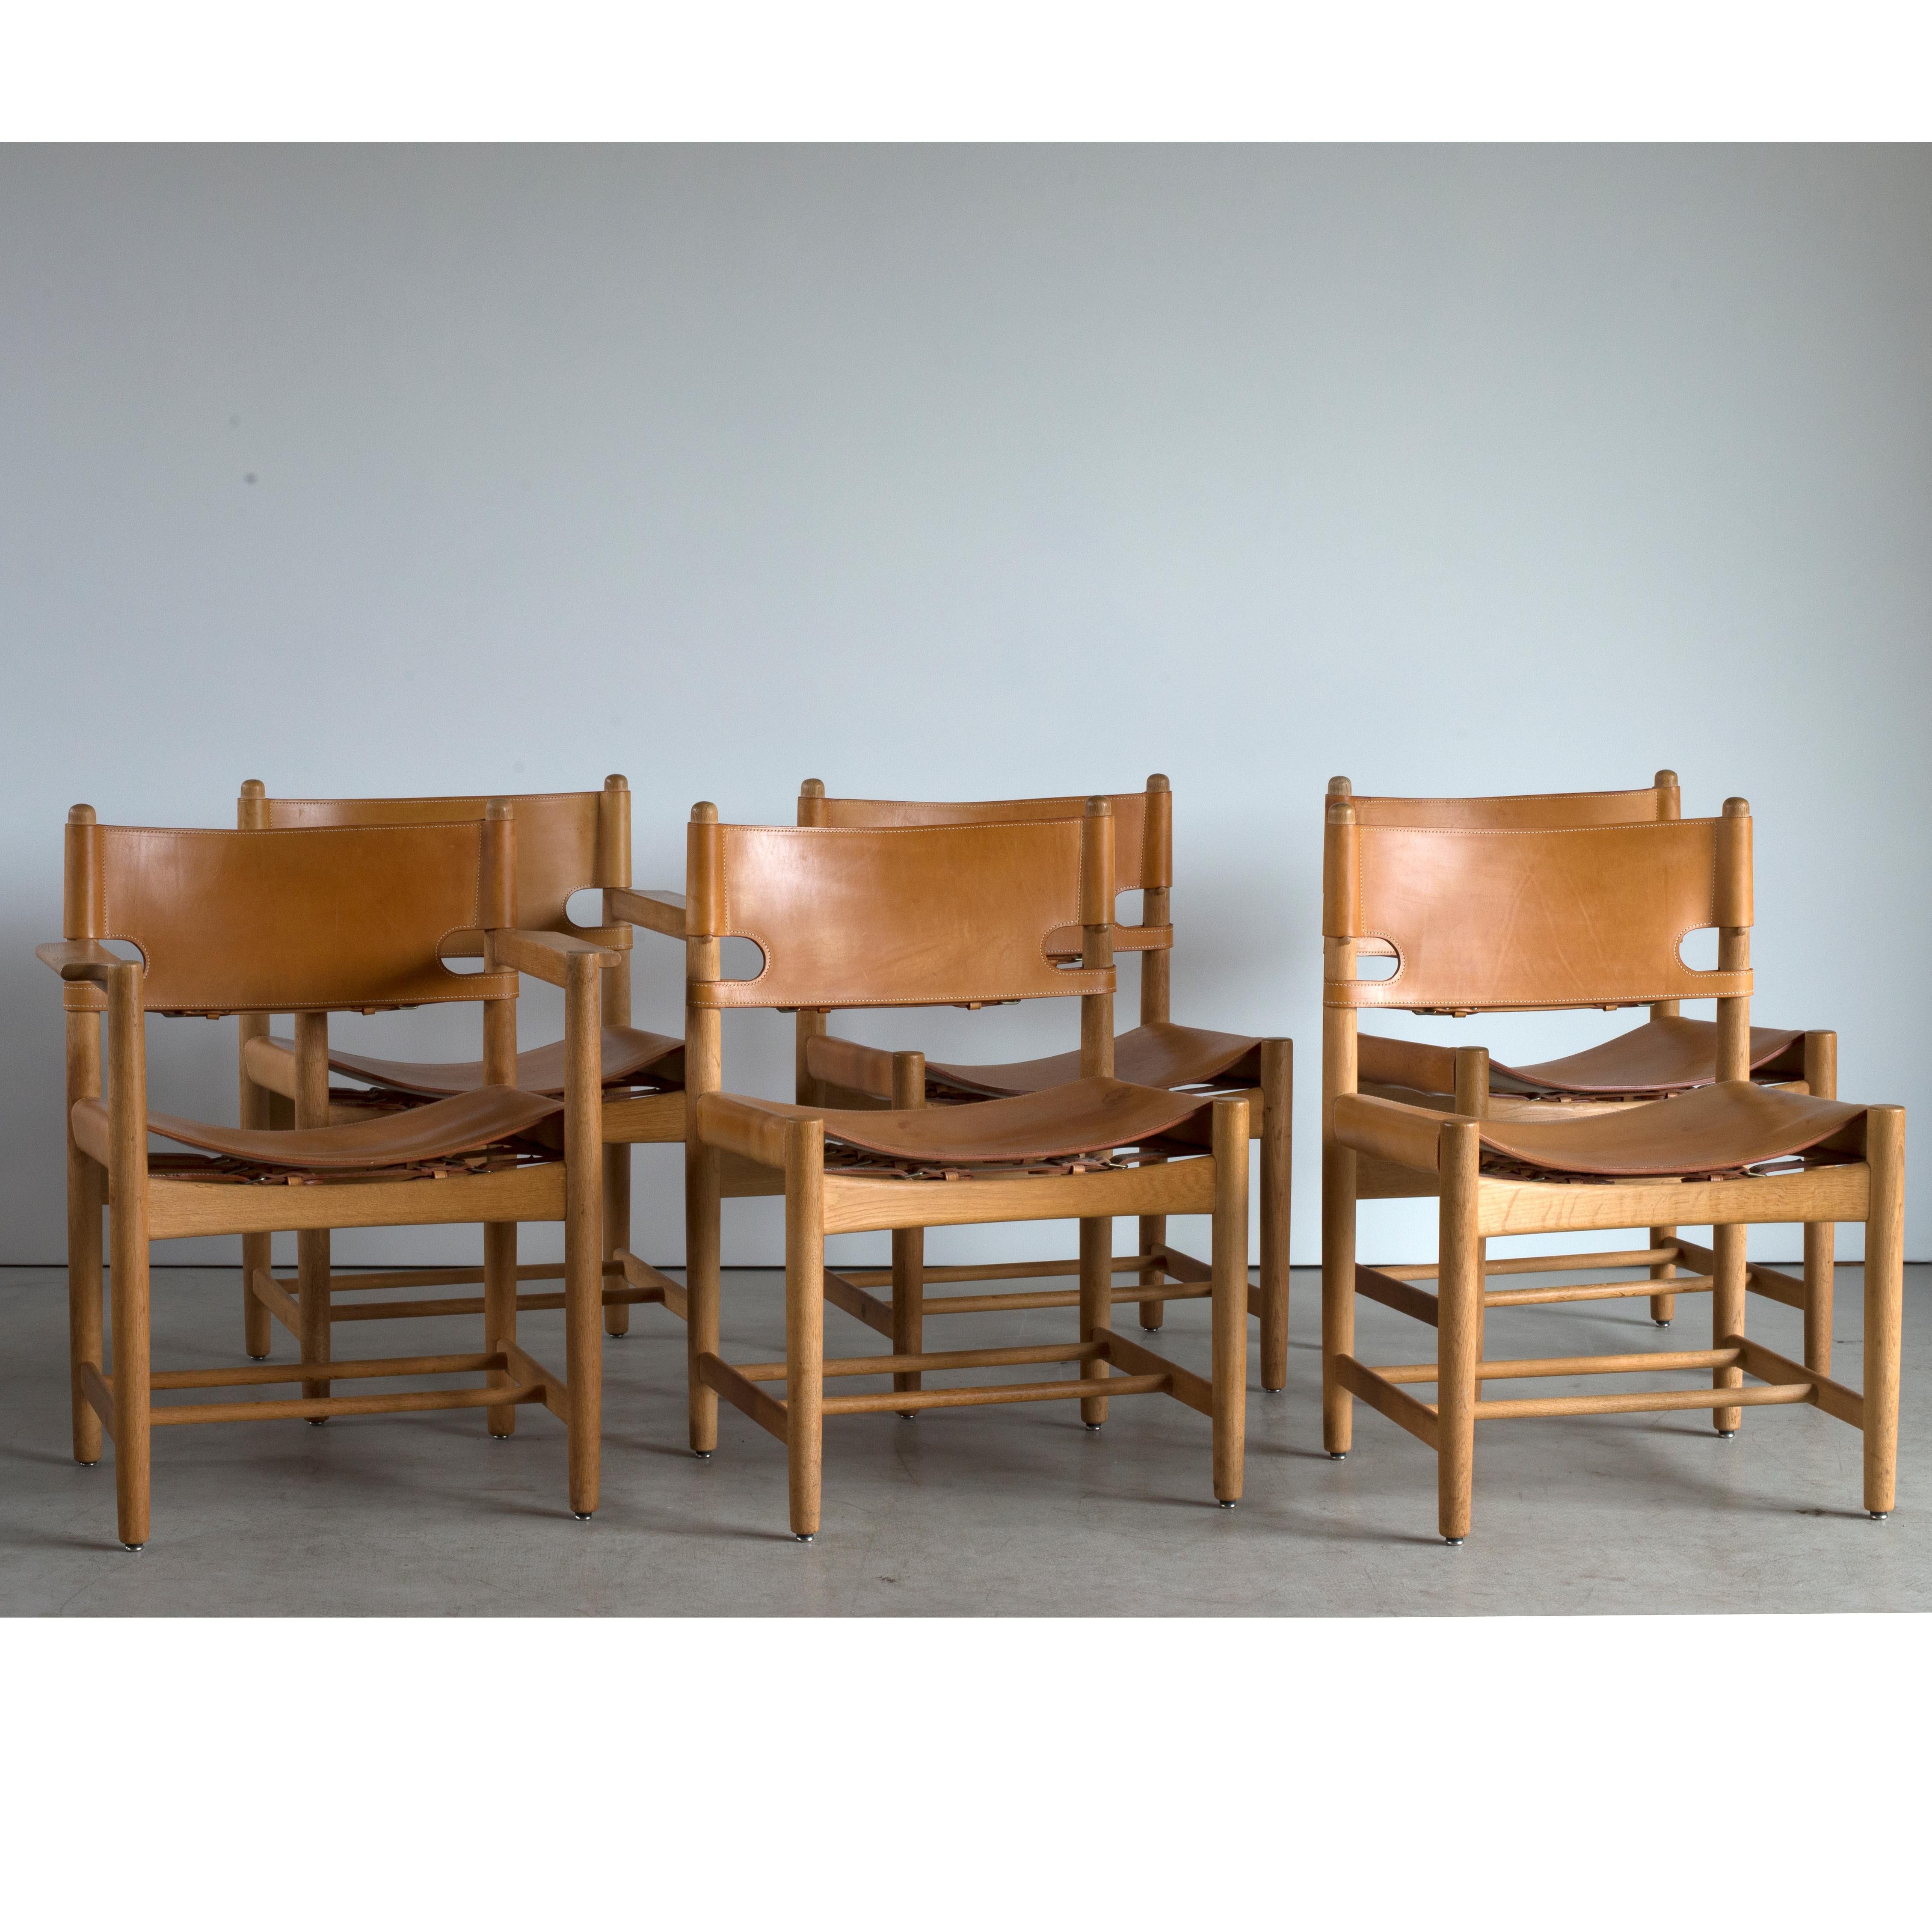 Børge Mogensen set of six dining chairs in Oak and natural tanned leather. Two chairs with armrests. Executed by Fredericia Furniture.